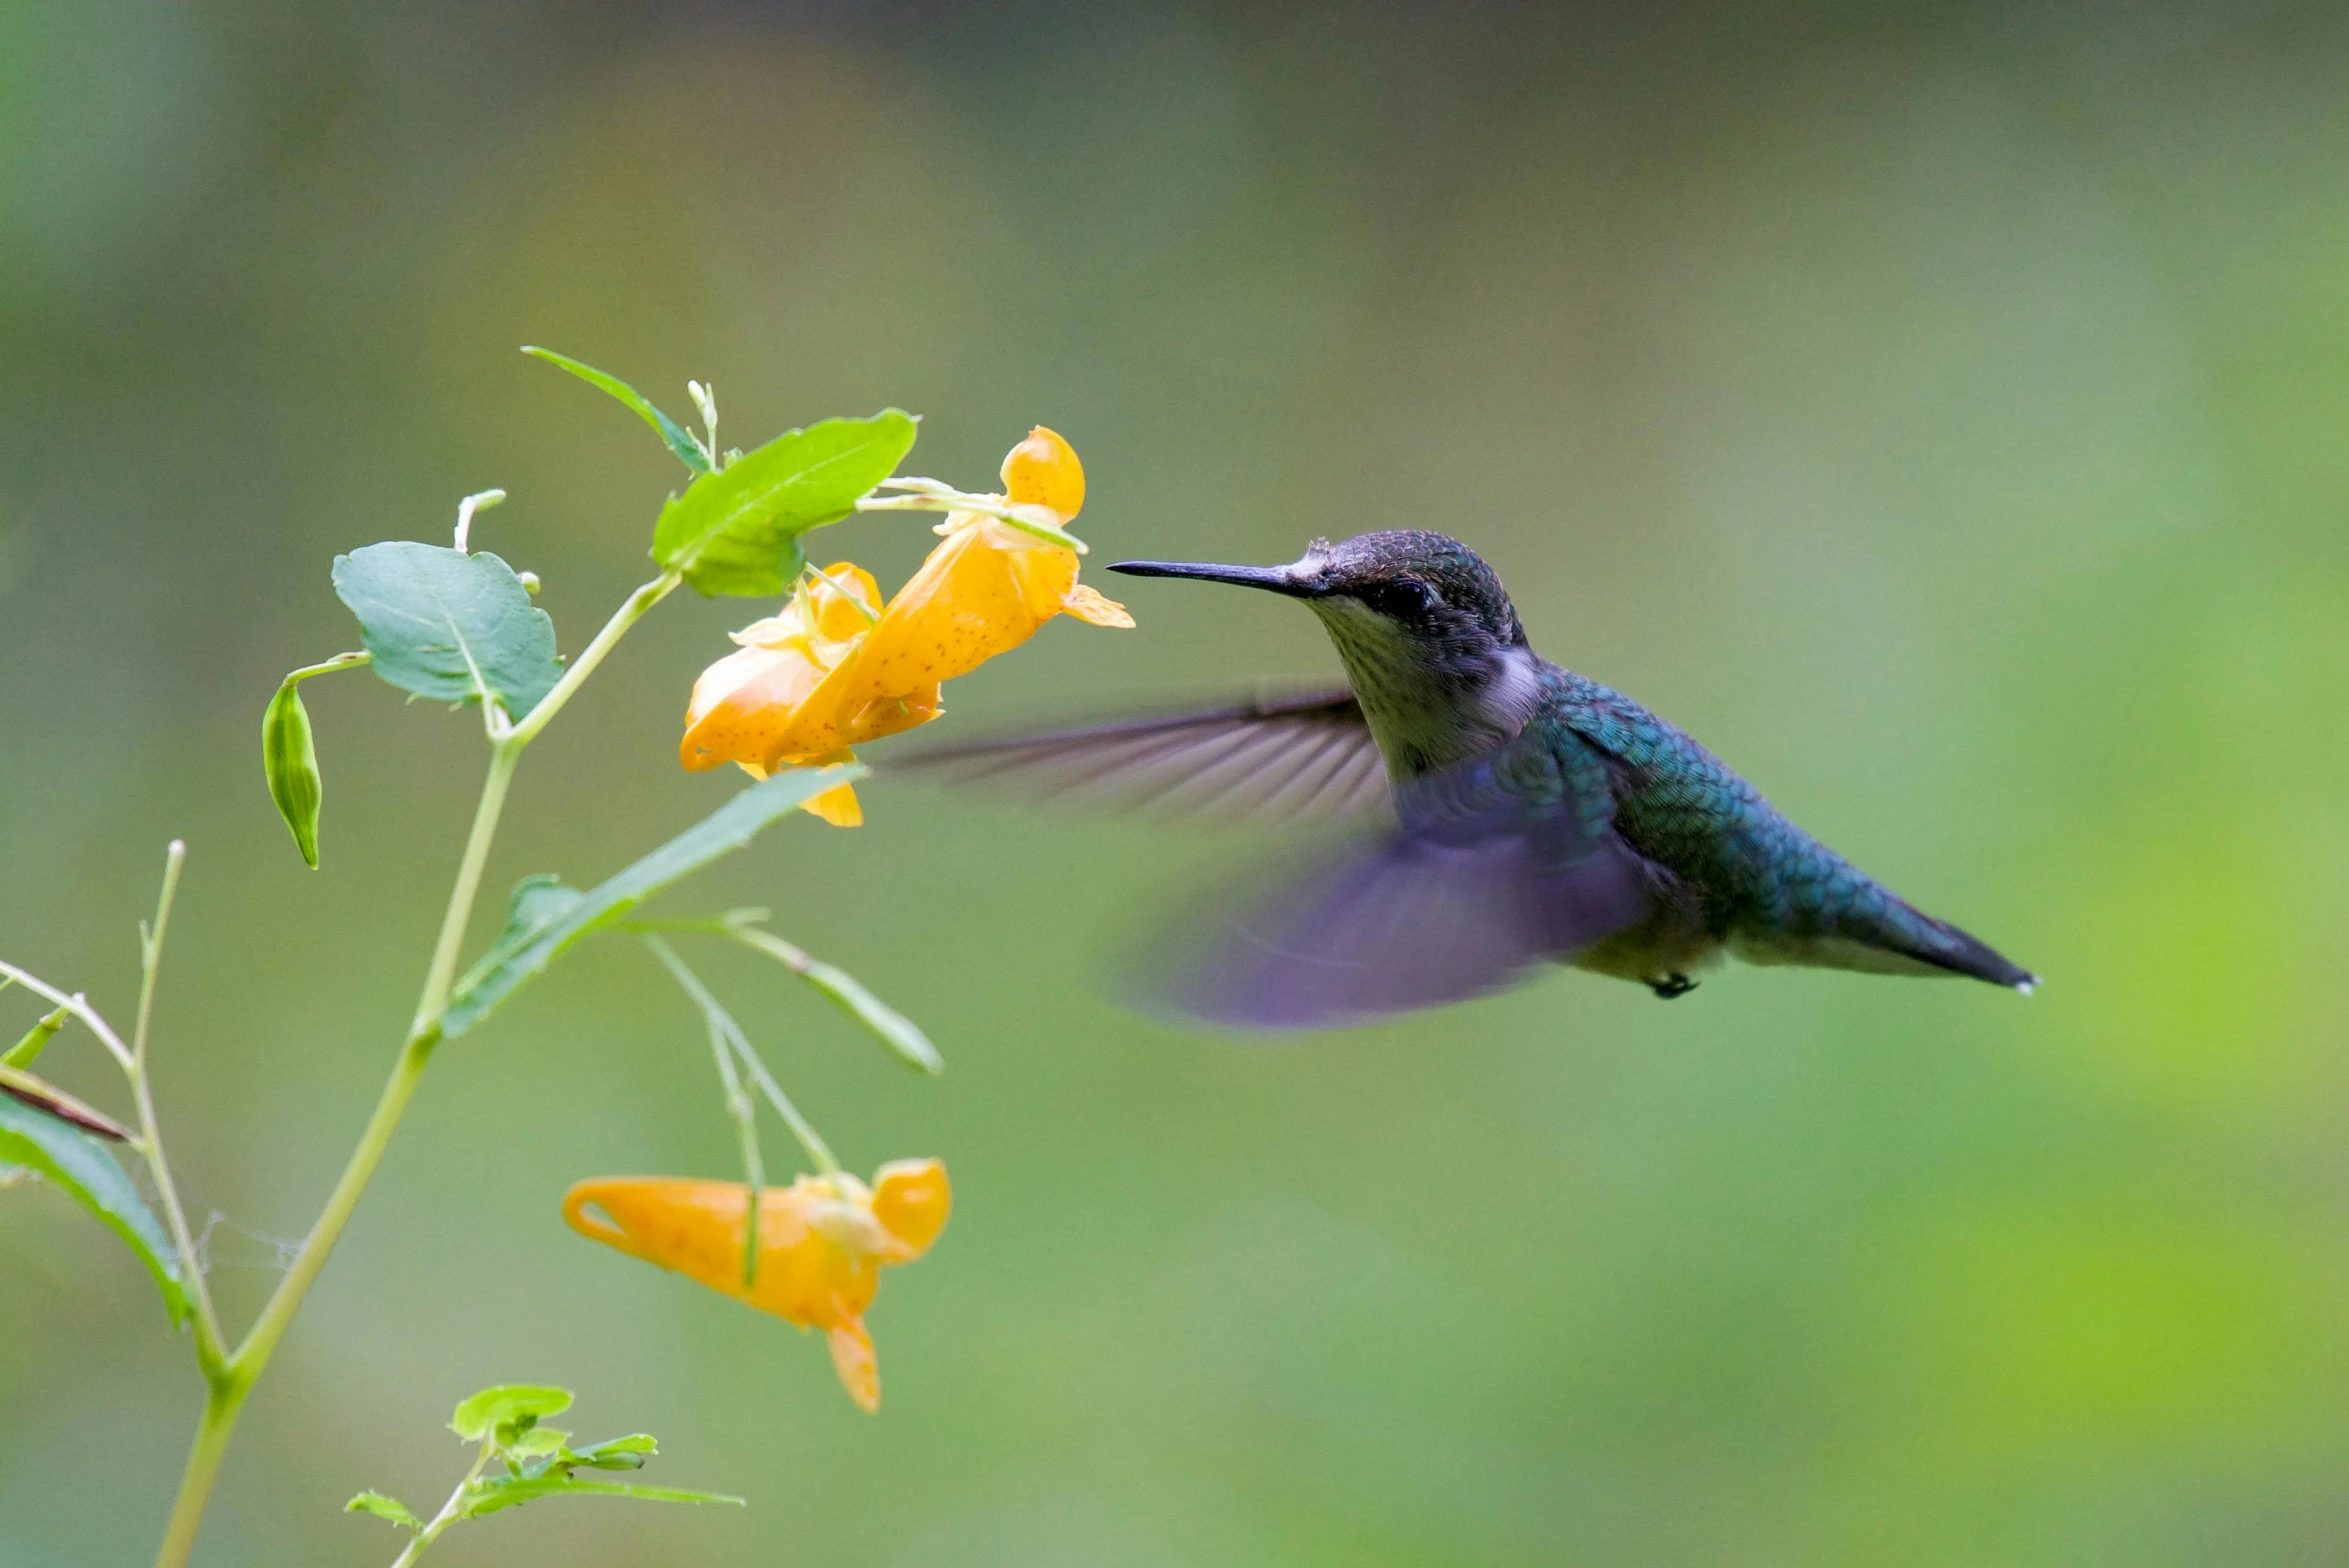 a humming bird flying in and out of a flower